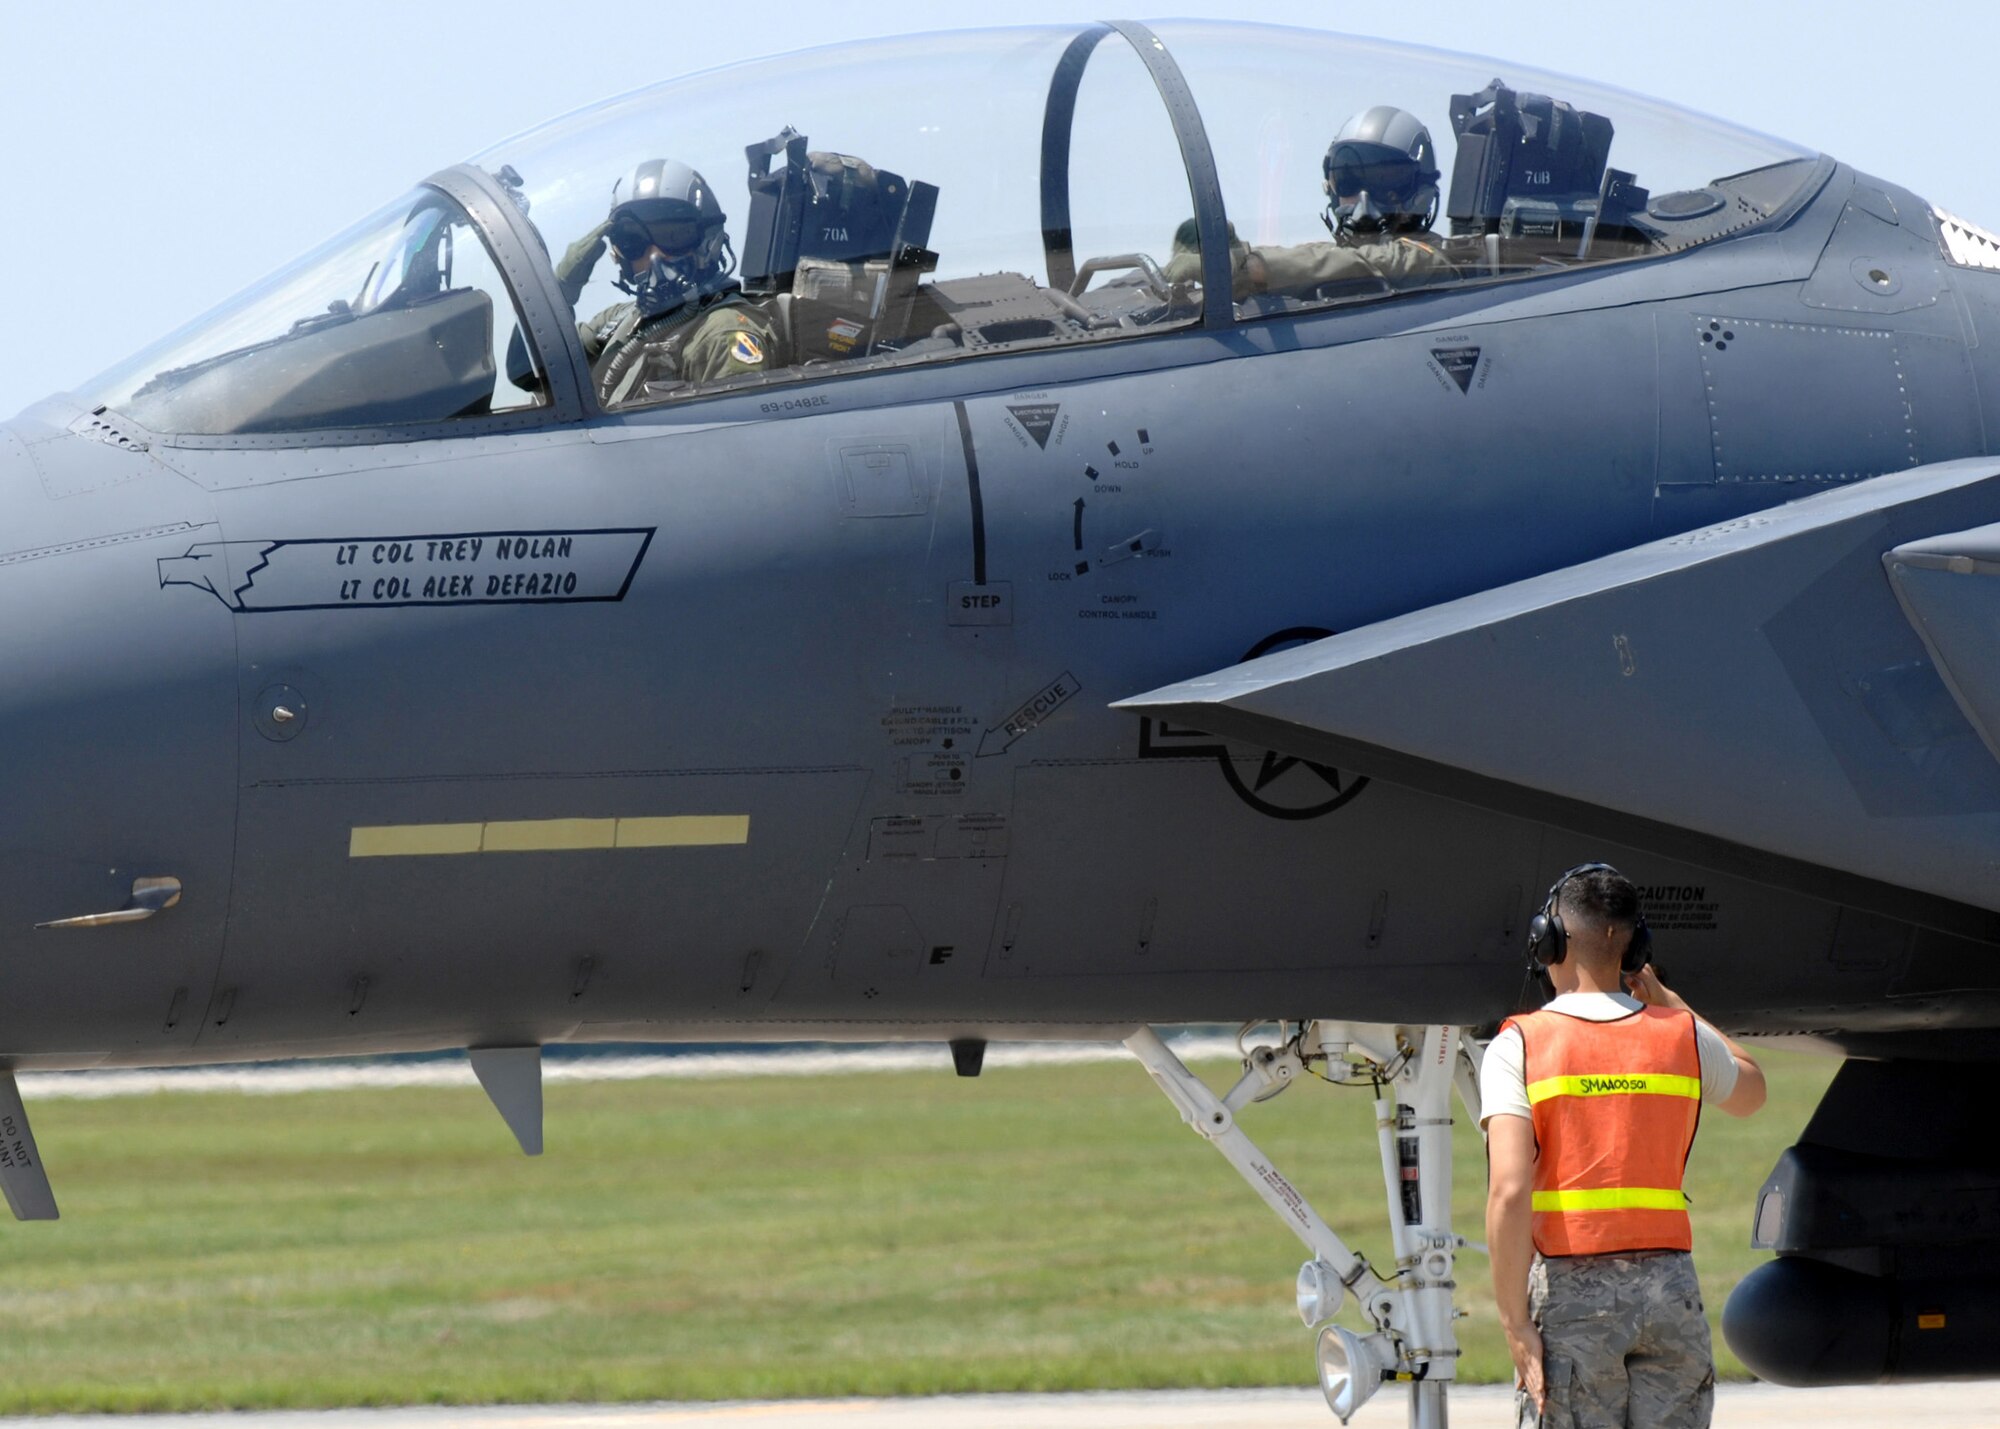 Airman 1st Class Fabian Hermosillo, 335th Aircraft Maintenance Unit, salutes the aircrew of an F-15E Strike Eagle, Seymour Johnson AFB, May 21, 2008.  A1C Hermosillo, a crew chief, works at the End of Runway where jets are inspected for last minute maintenance issues. (U.S. Air Force photo by Airman 1st Class Rae A. Henline)